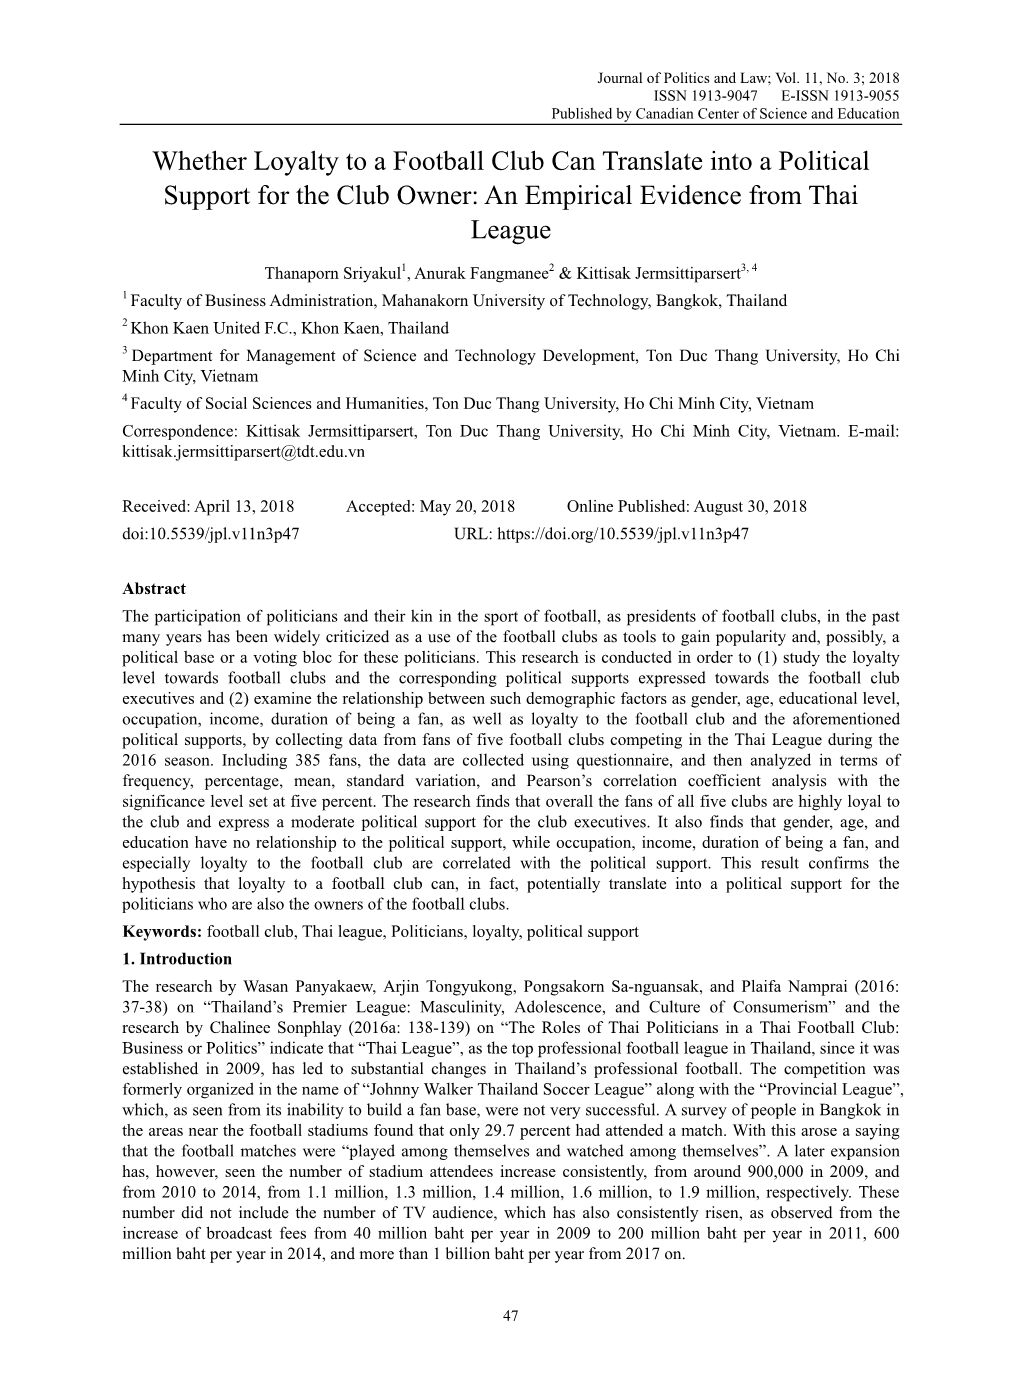 Whether Loyalty to a Football Club Can Translate Into a Political Support for the Club Owner: an Empirical Evidence from Thai League